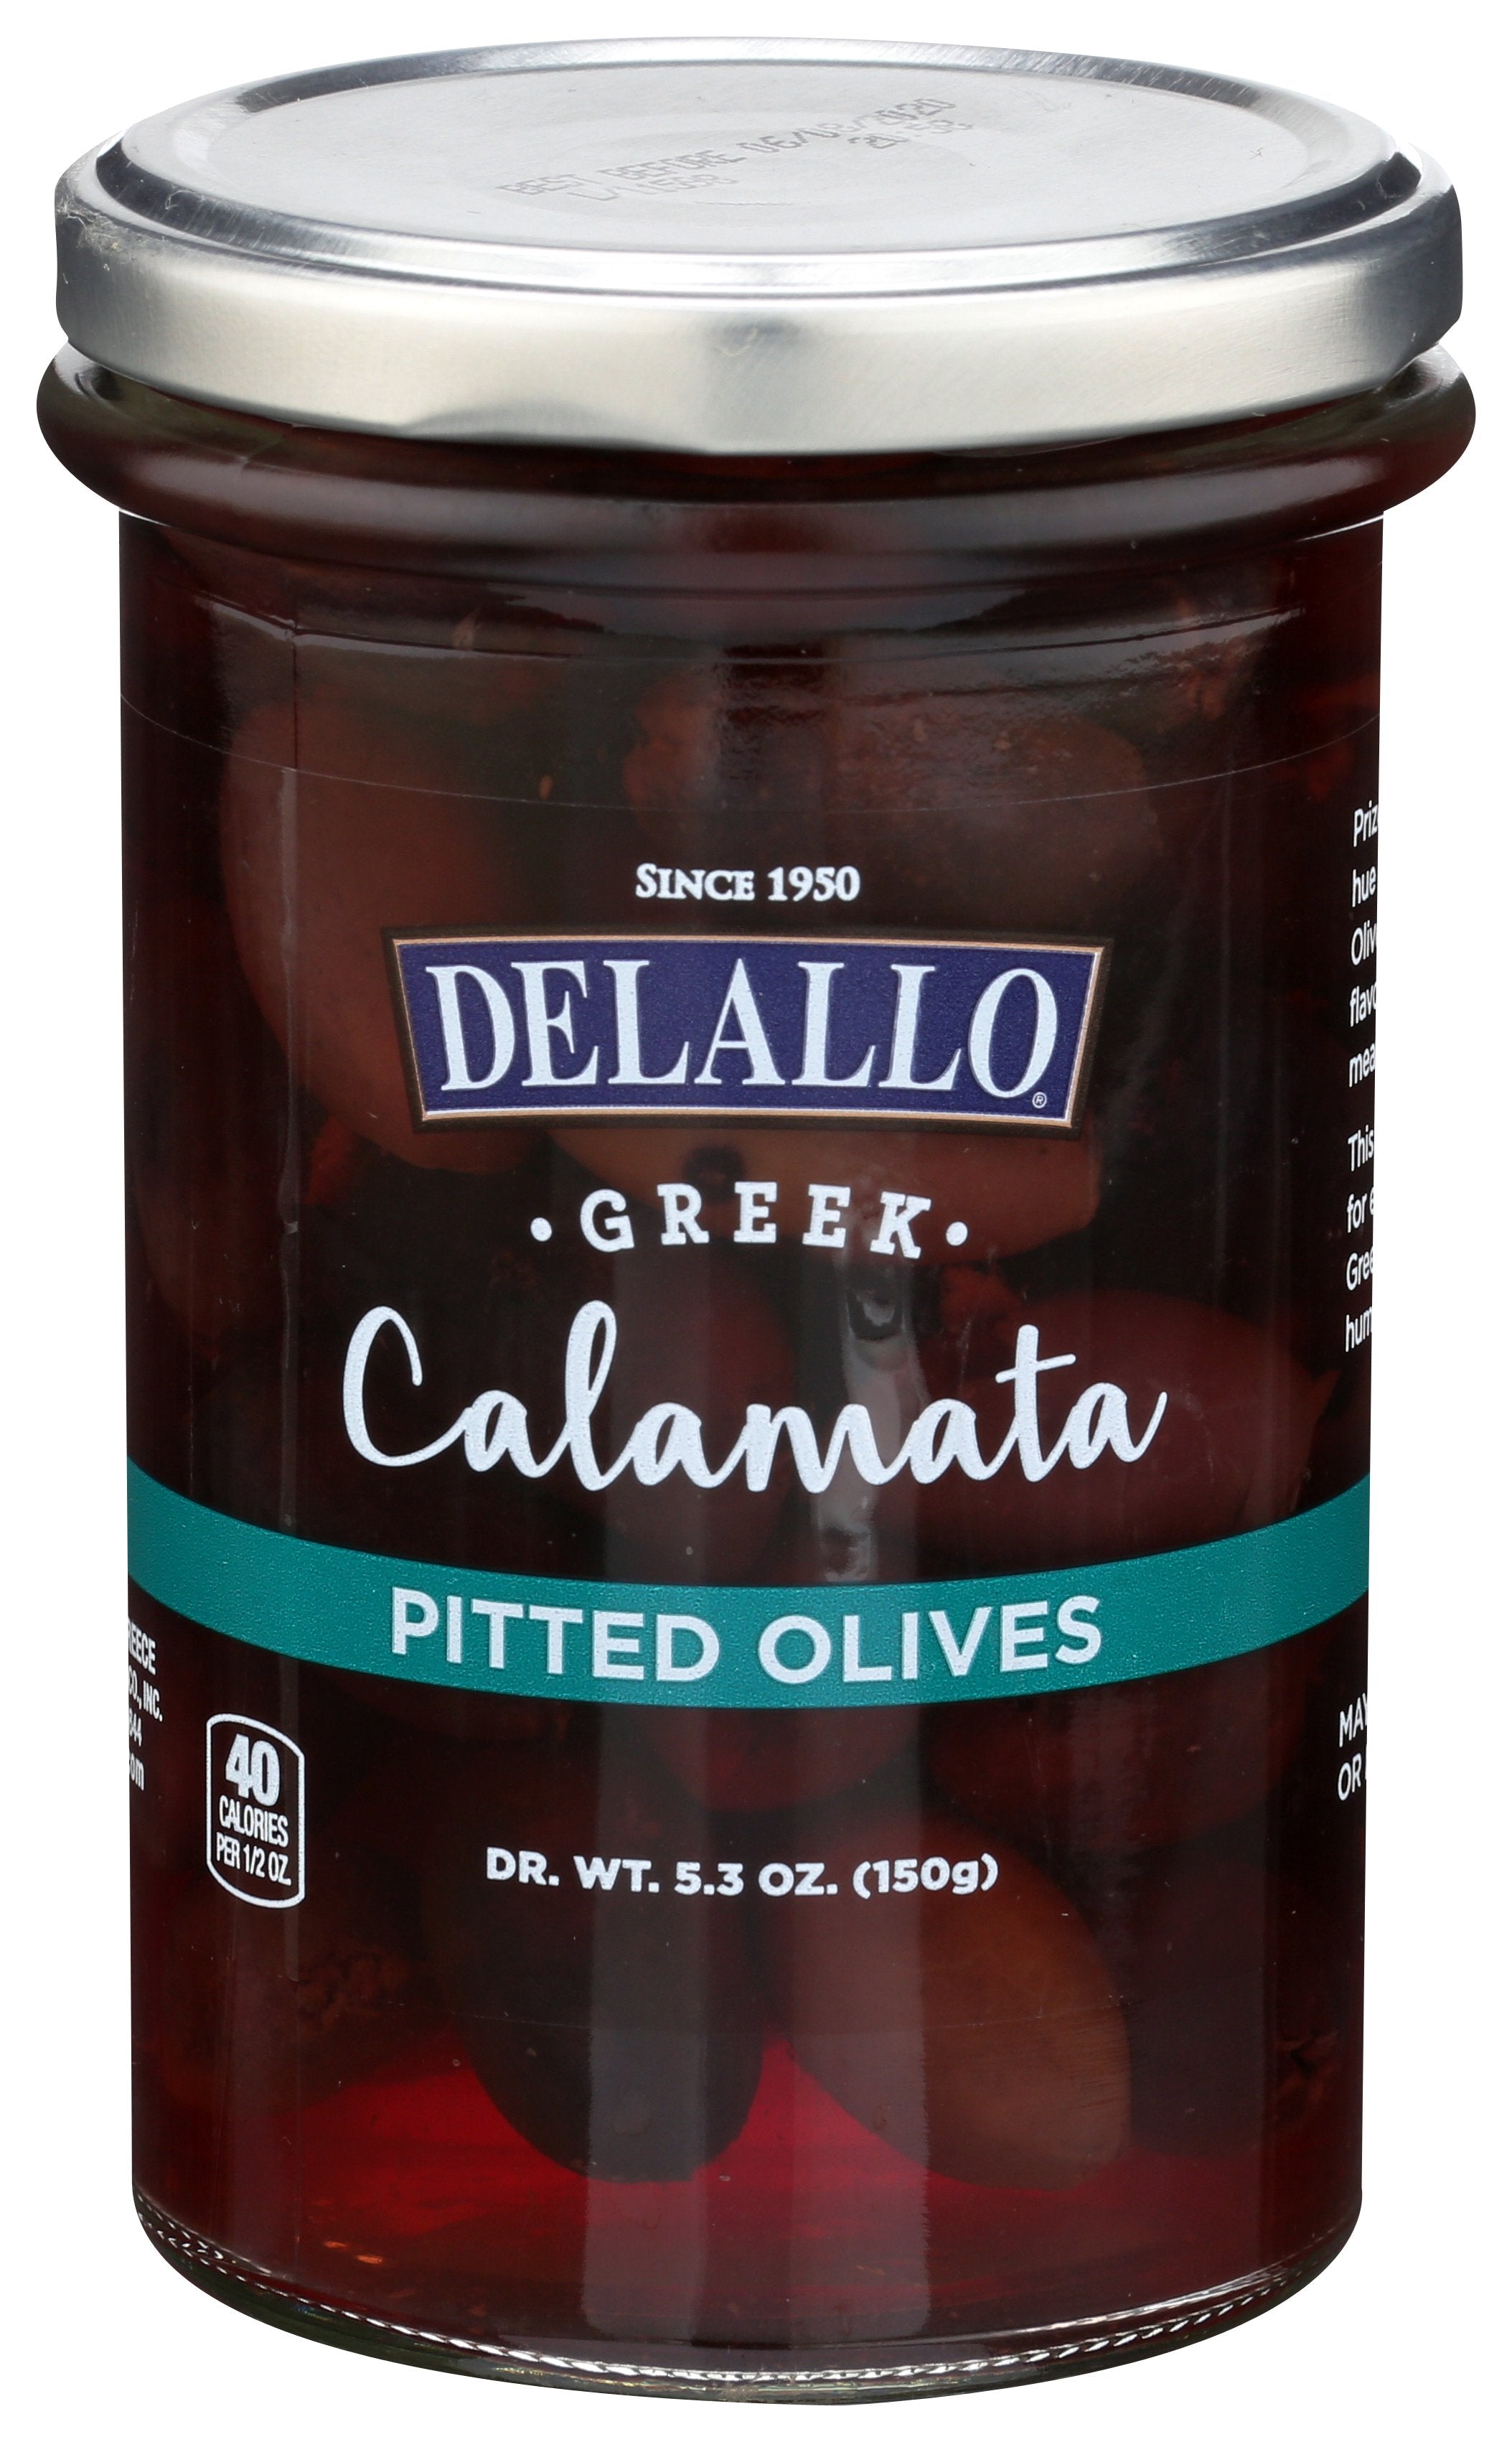 DELALLO OLIVES CALAMATA PITTED - Case of 6